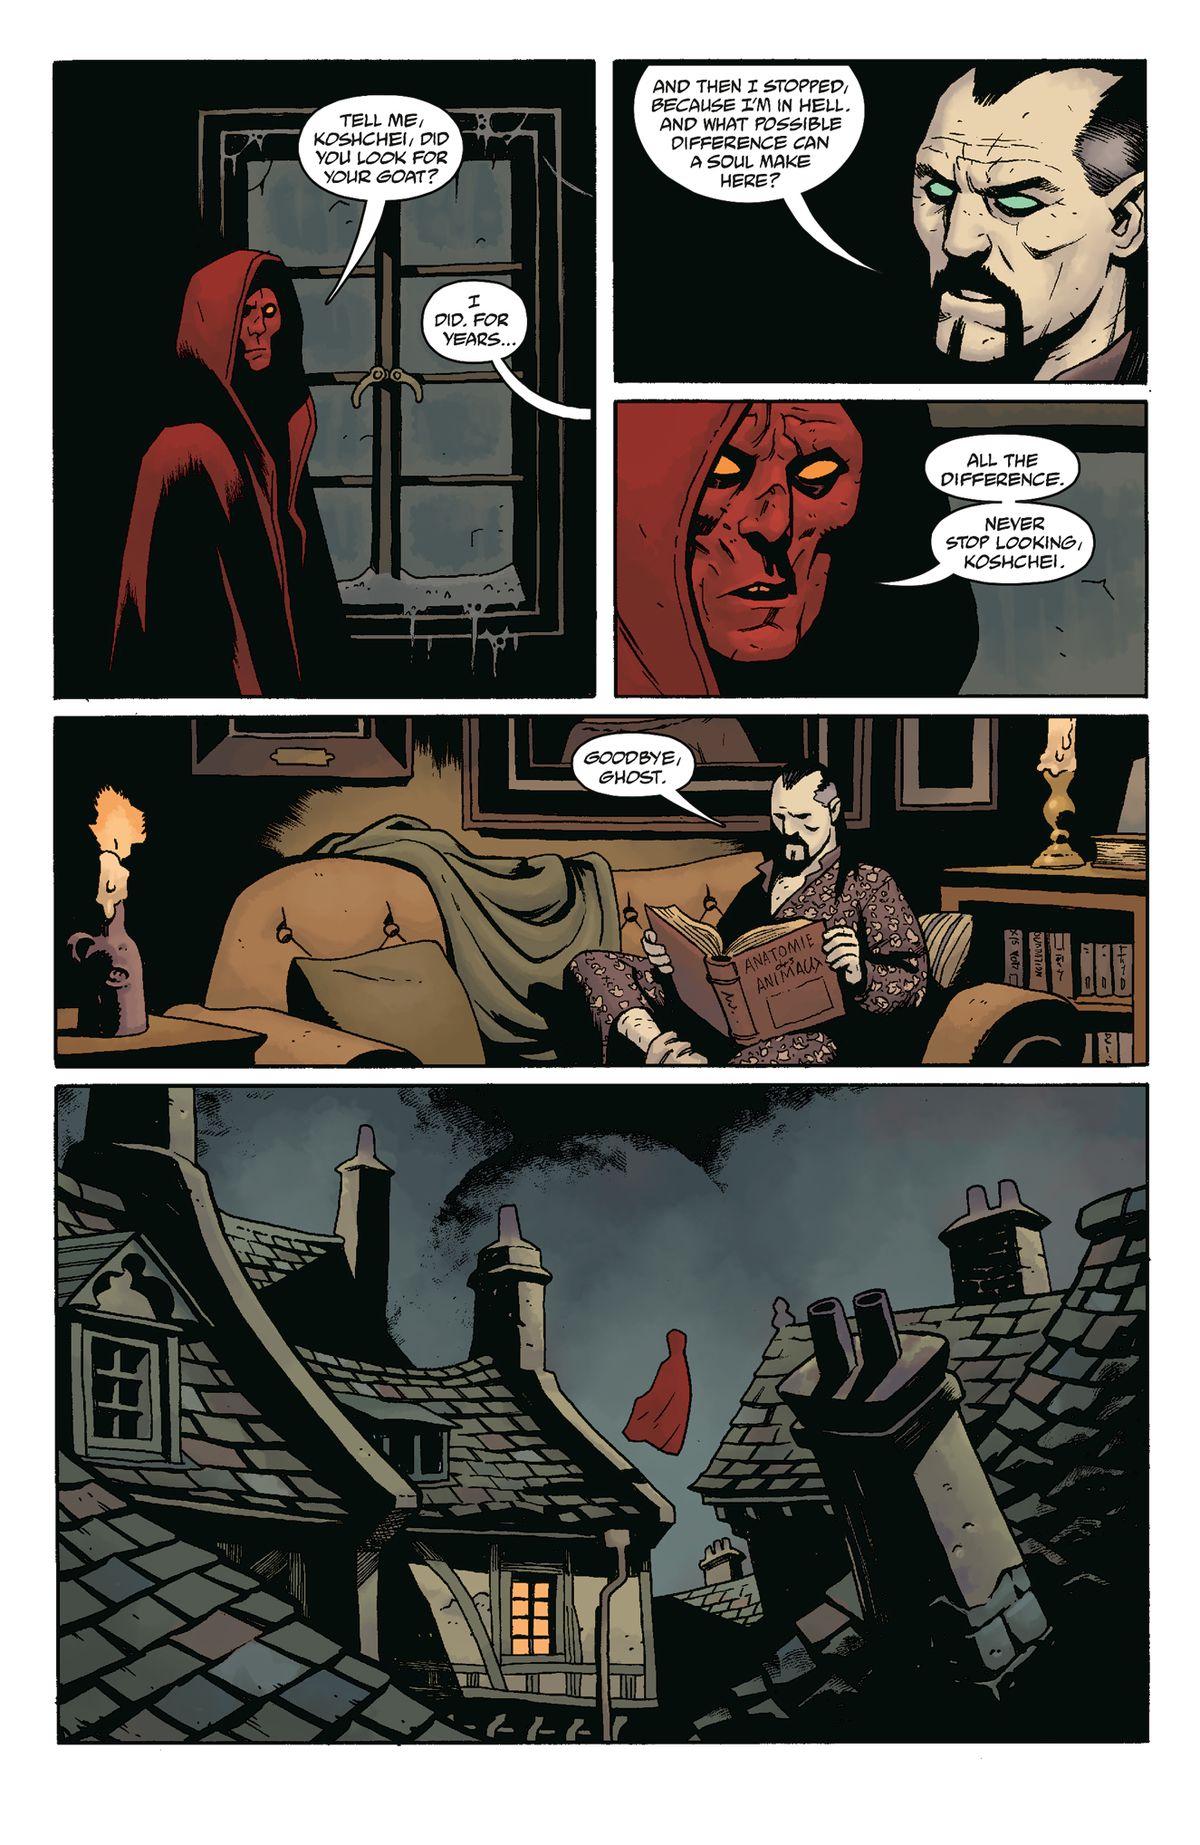 The “ghost” tells Koshchei that he should keep looking for his goat and his soul and then departs, floating over the rooftops in Koshchei in Hell #1 (2022).